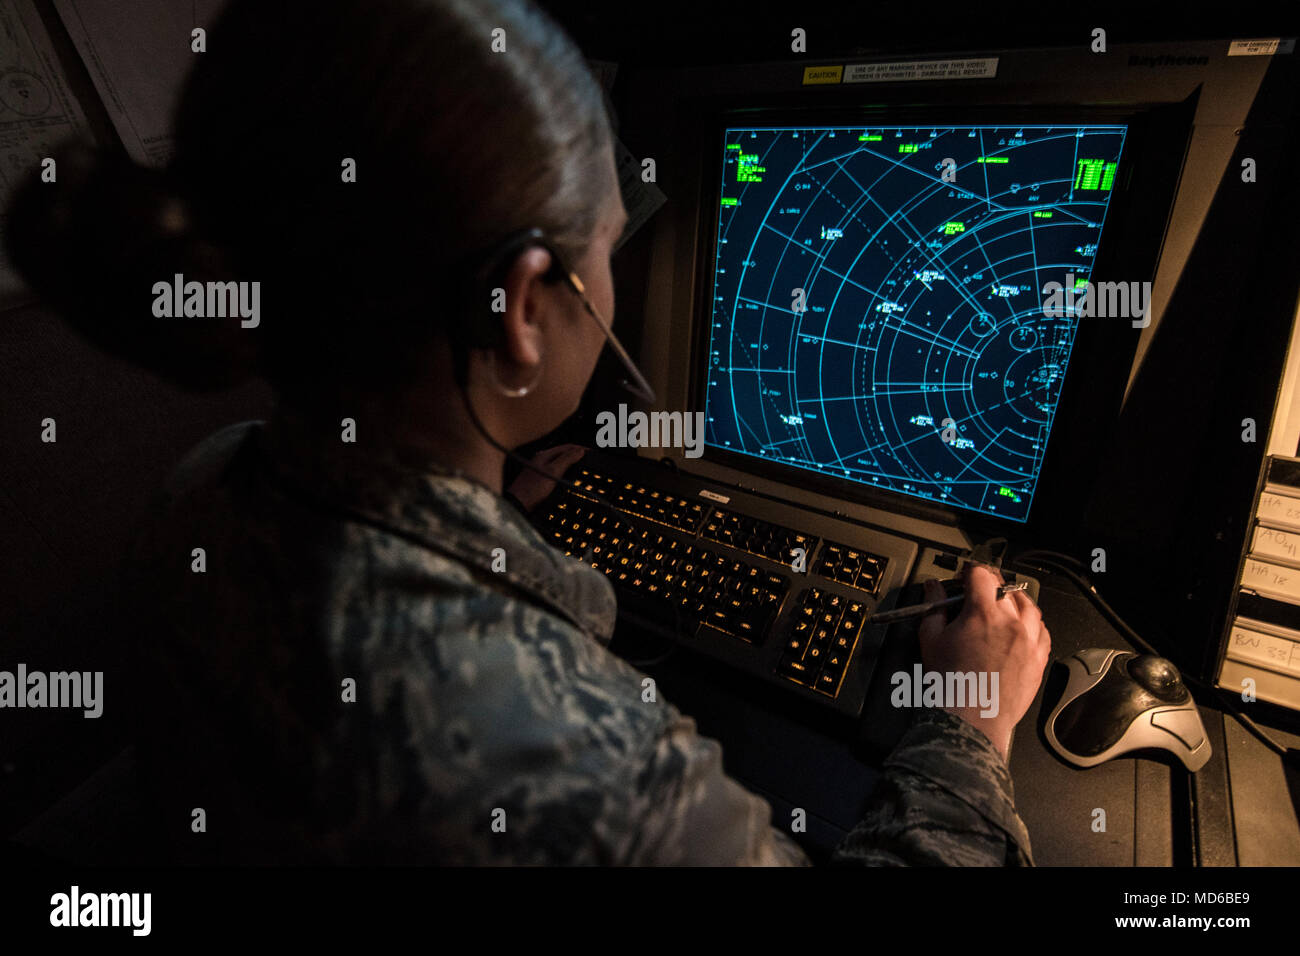 An air traffic controller trains on a simulator in the Radar Approach Control(RAPCON) facility March 22, 2018, at Vance Air Force Base, Okla. The simulator trains Airmen for day to day air traffic scenarios. (U.S. Air Force photo by Airman Zachary Heal) Stock Photo